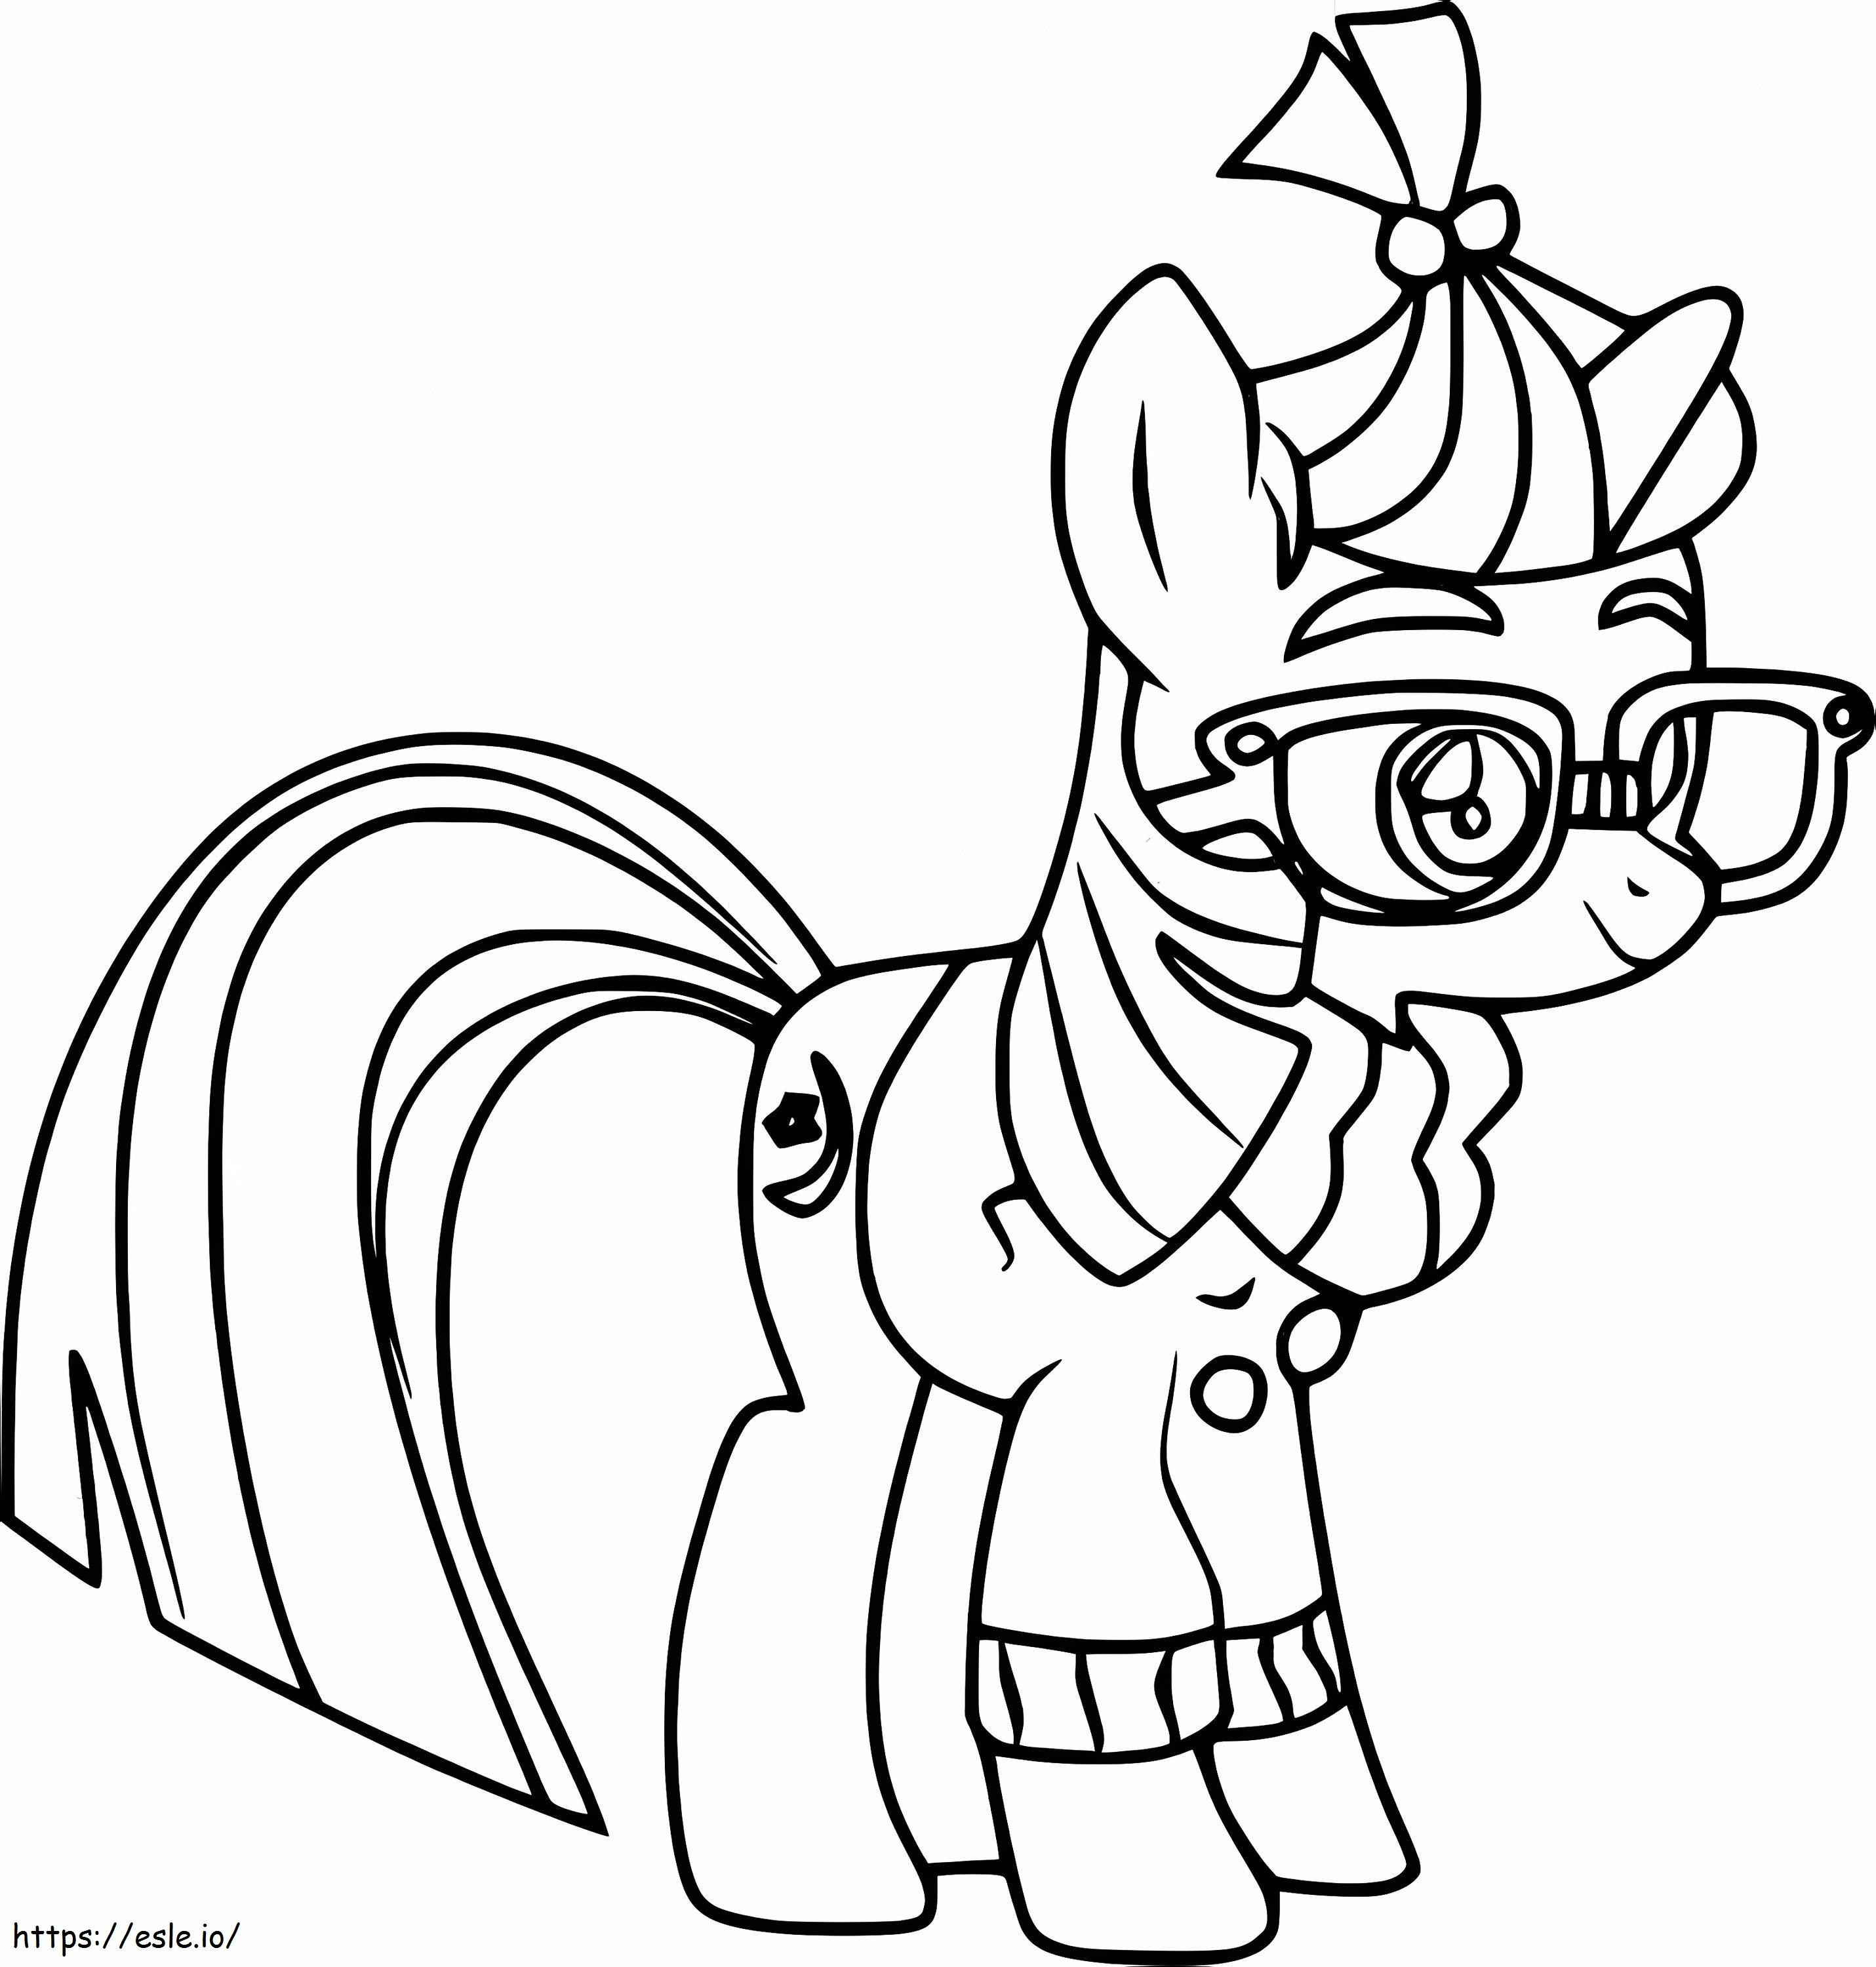 Moon Dancer My Little Pony coloring page